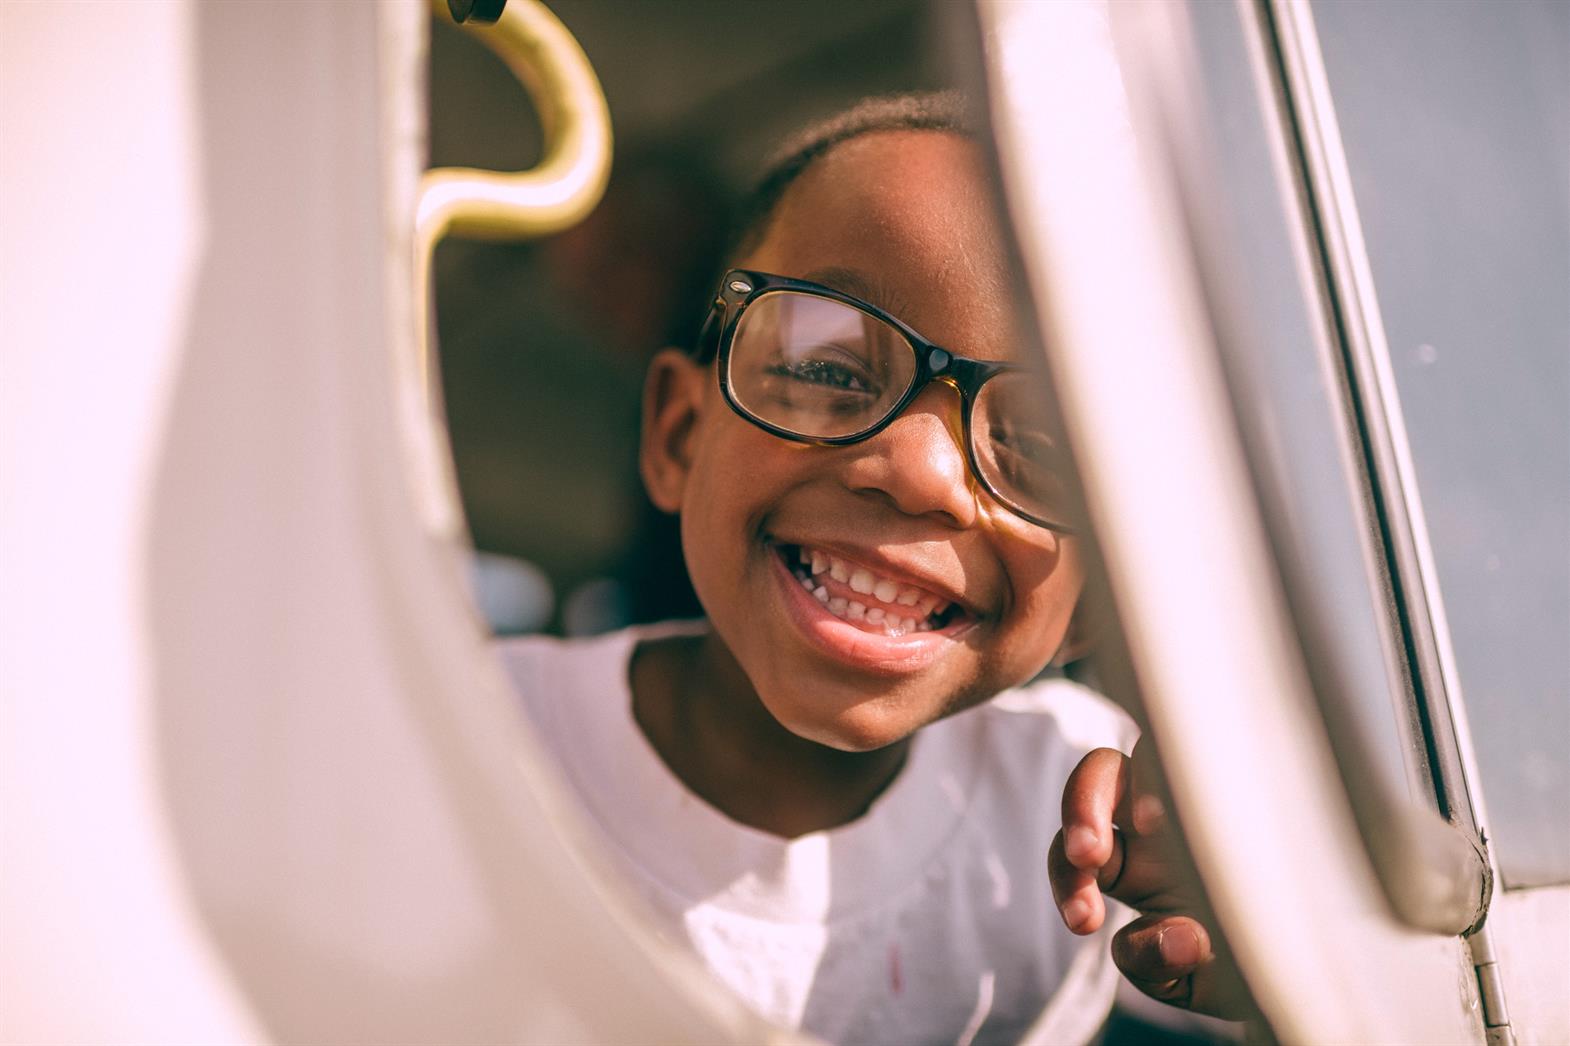 Child wearing glasses looking out a window and smiling